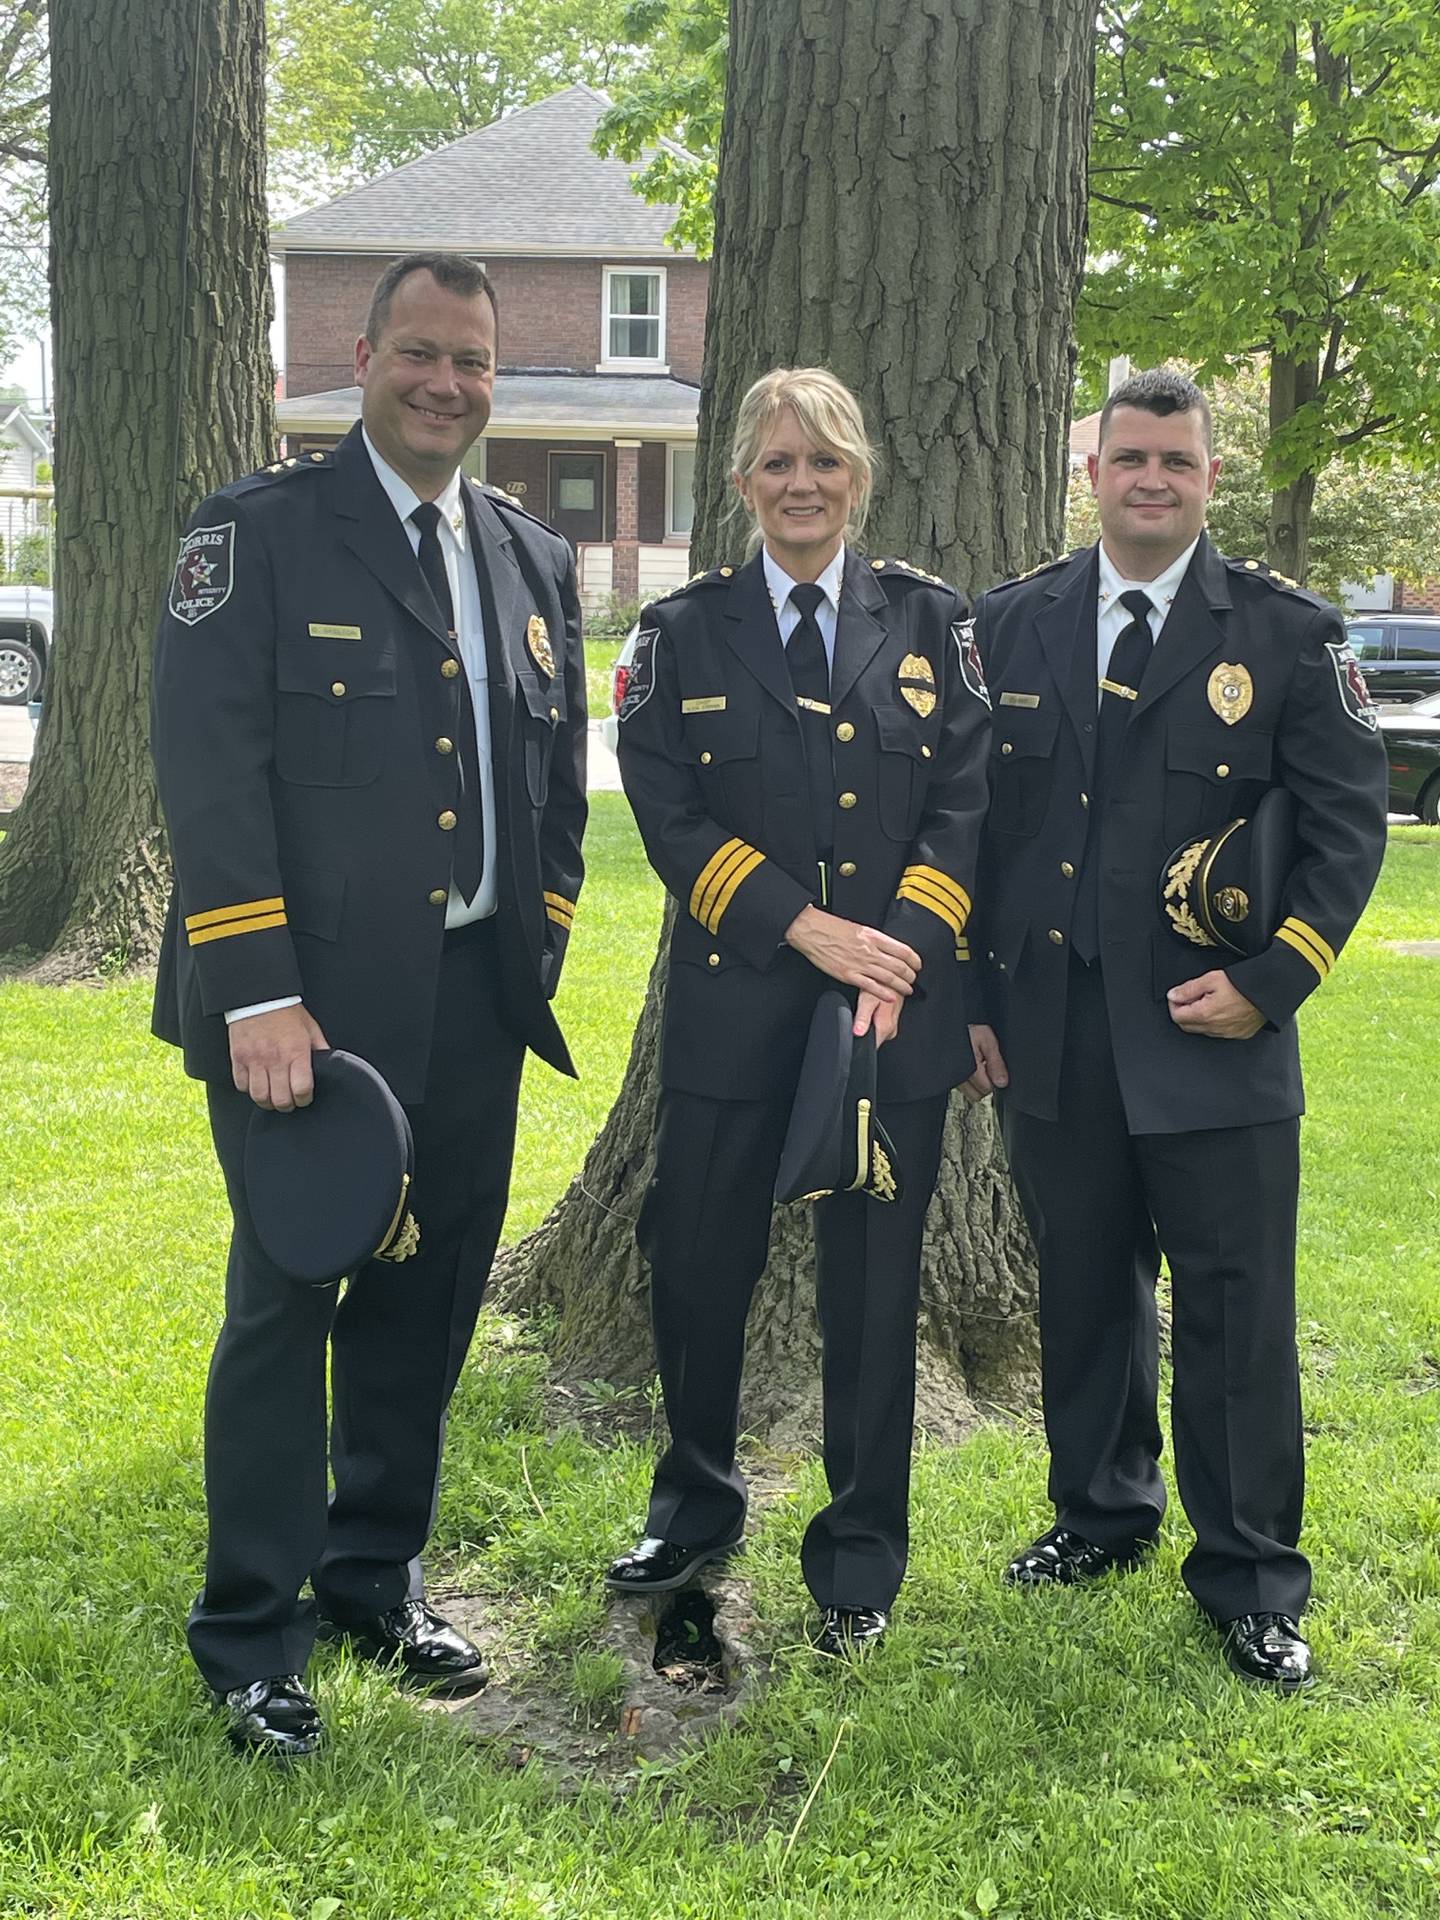 Deputy Chief Chad Skelton, Chief Alicia Steffes, and Deputy Chief Paul Burke at this years police memorial on May 19 at Chapin Park.